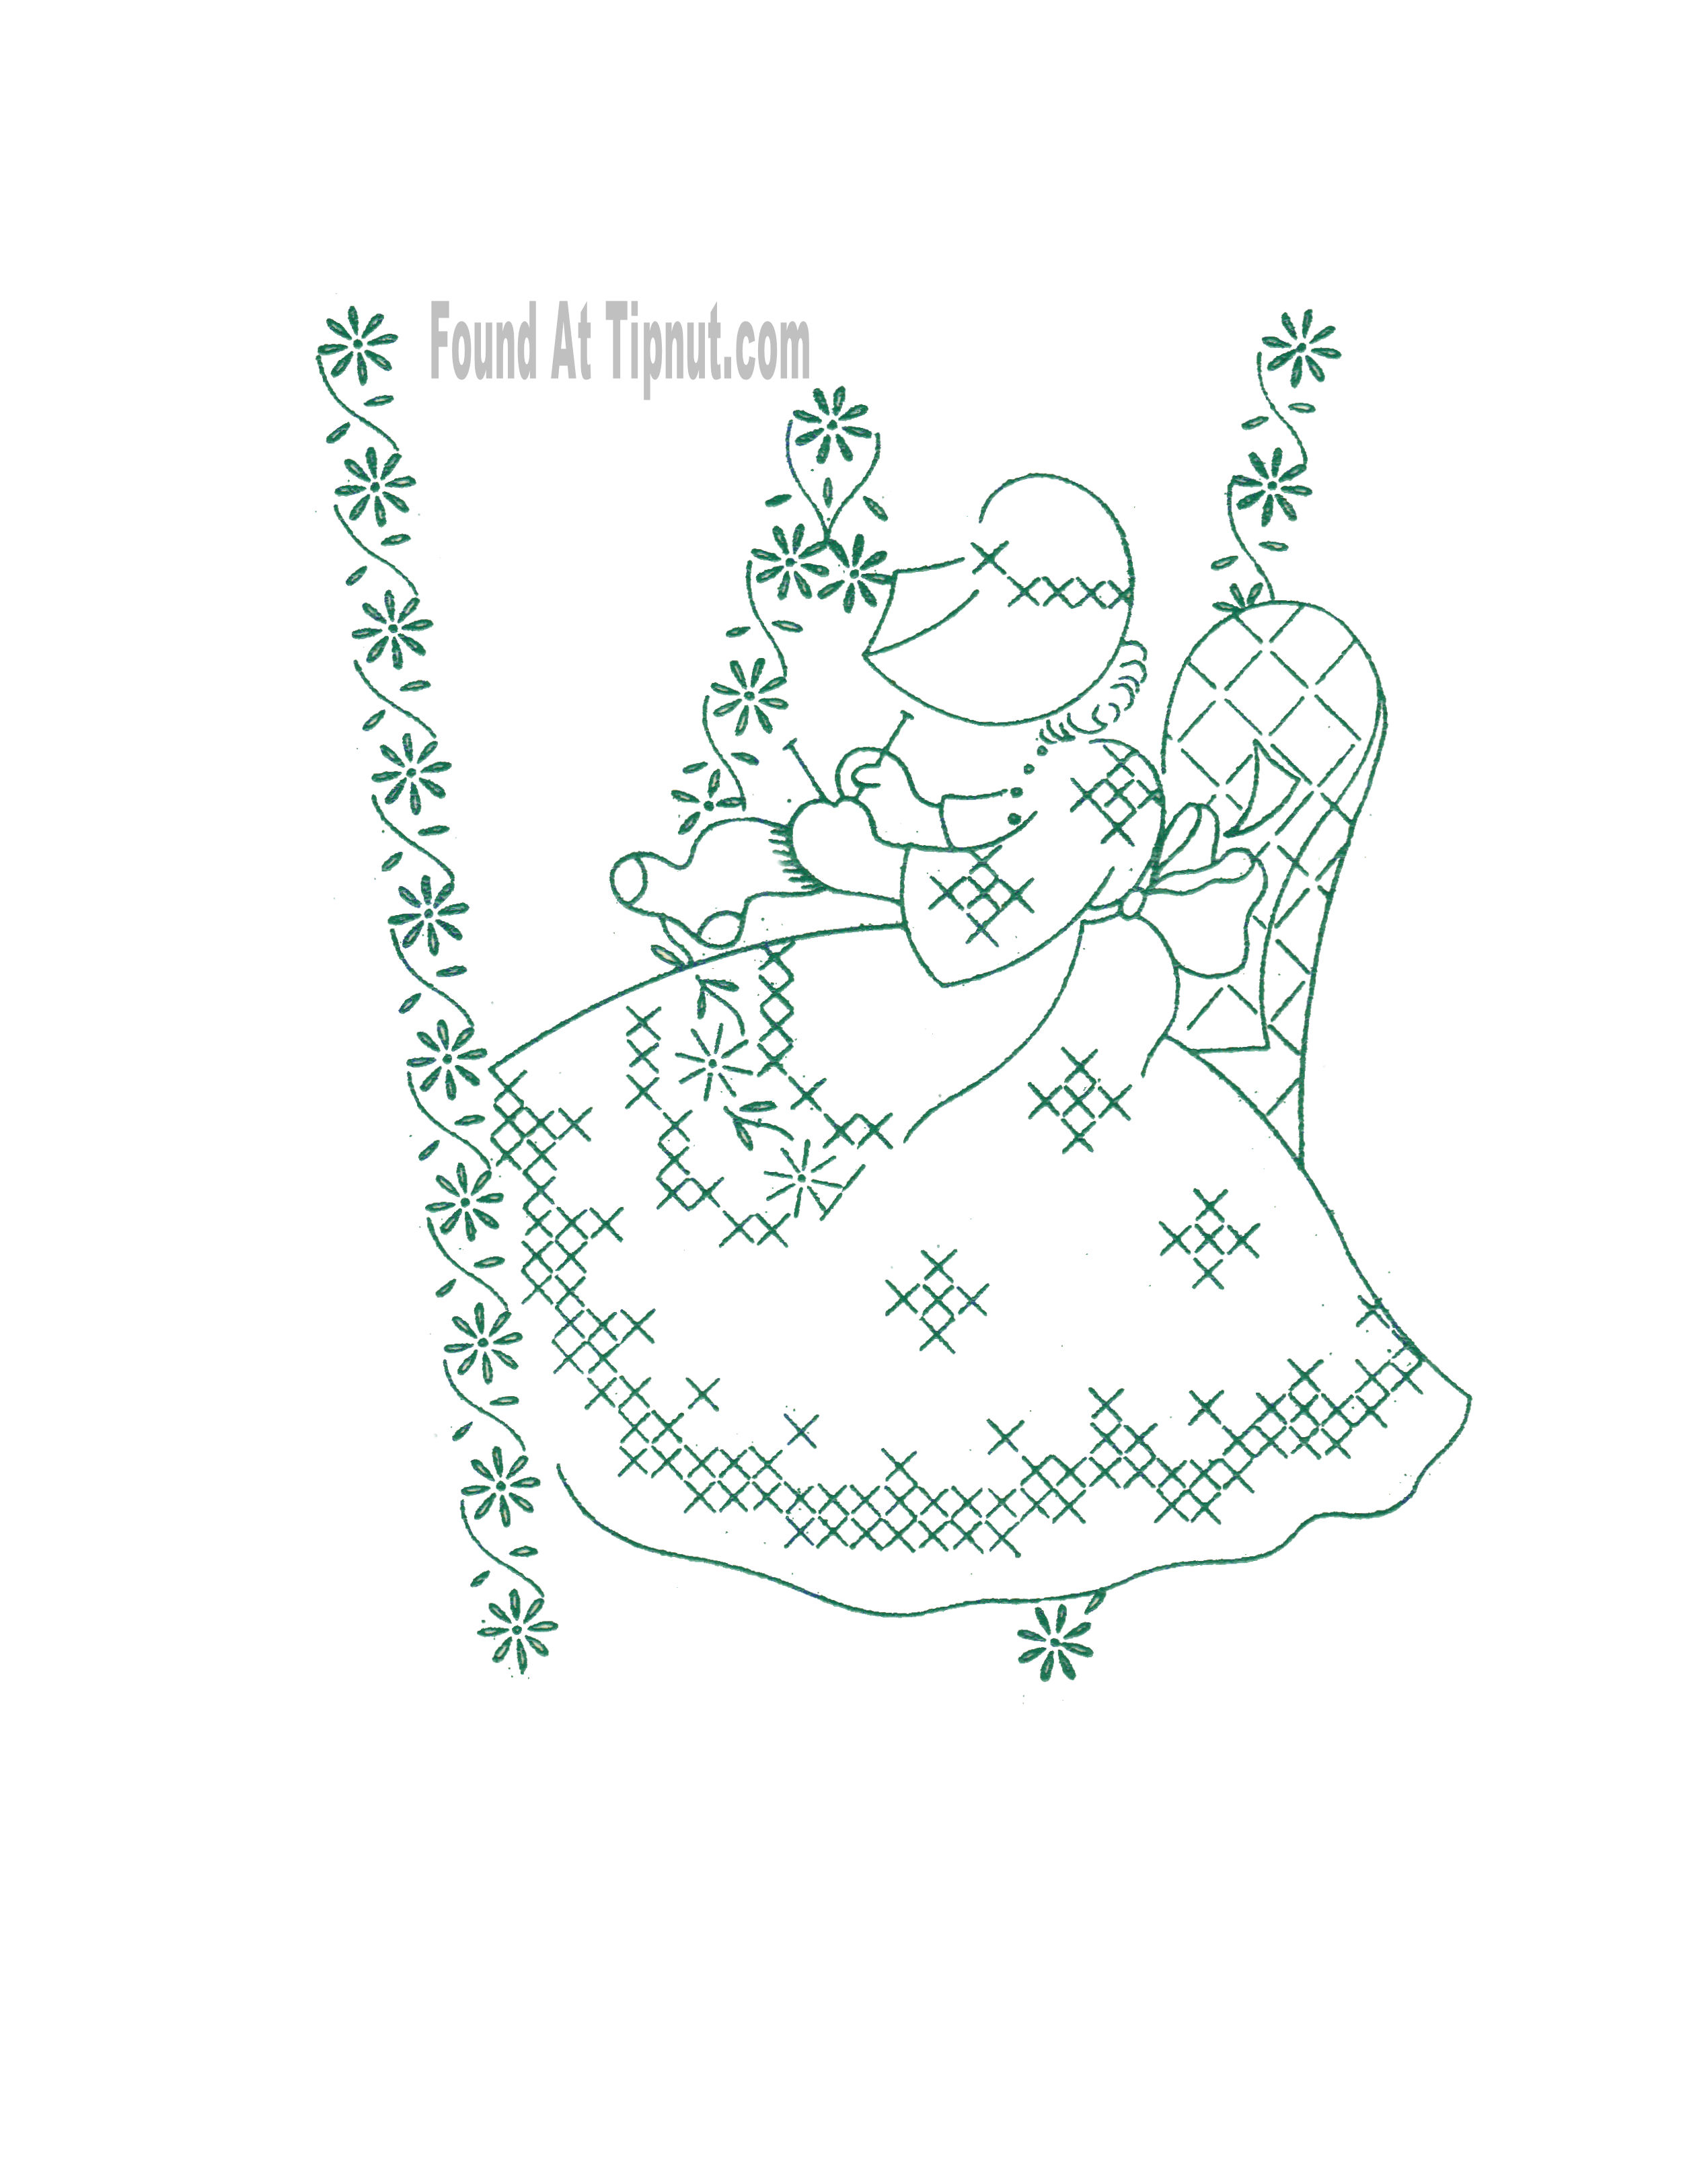 Sunbonnet Sue Embroidery Patterns Free Sunbonnet Gal Days Of The Week Embroidery Tipnut